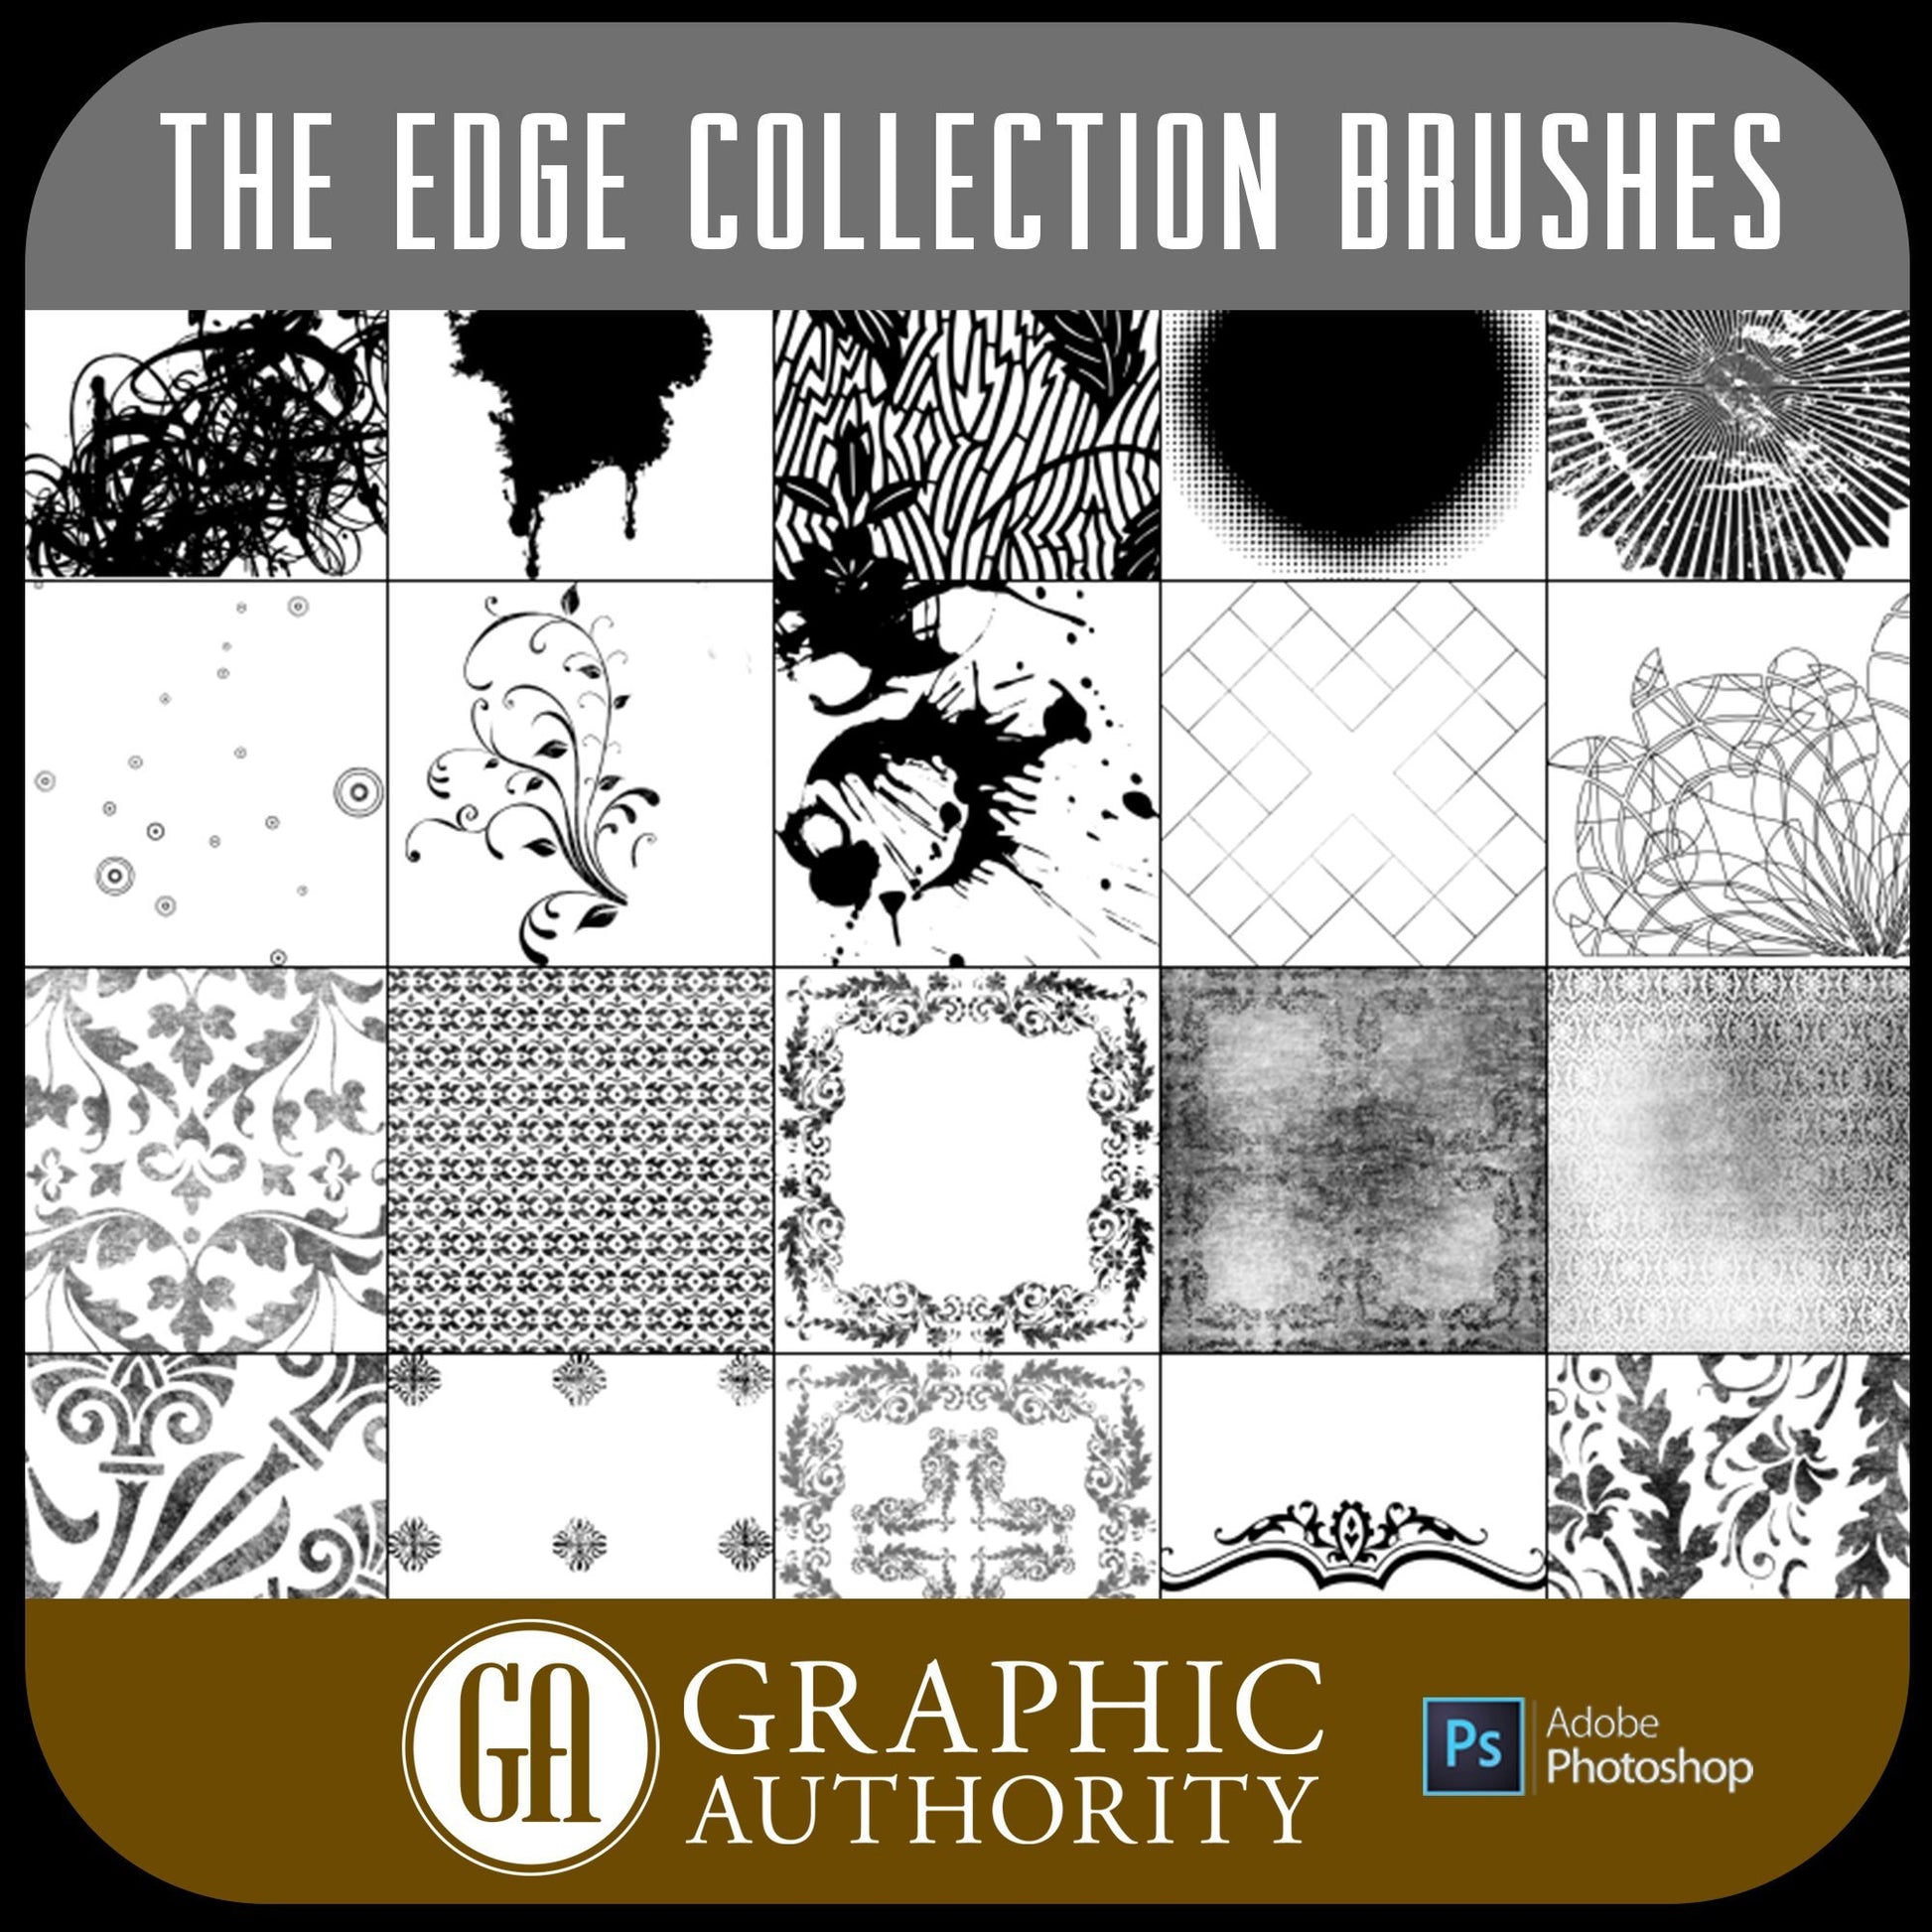 The Edge Collection - Photoshop ABR Brushes-Photoshop Template - Graphic Authority